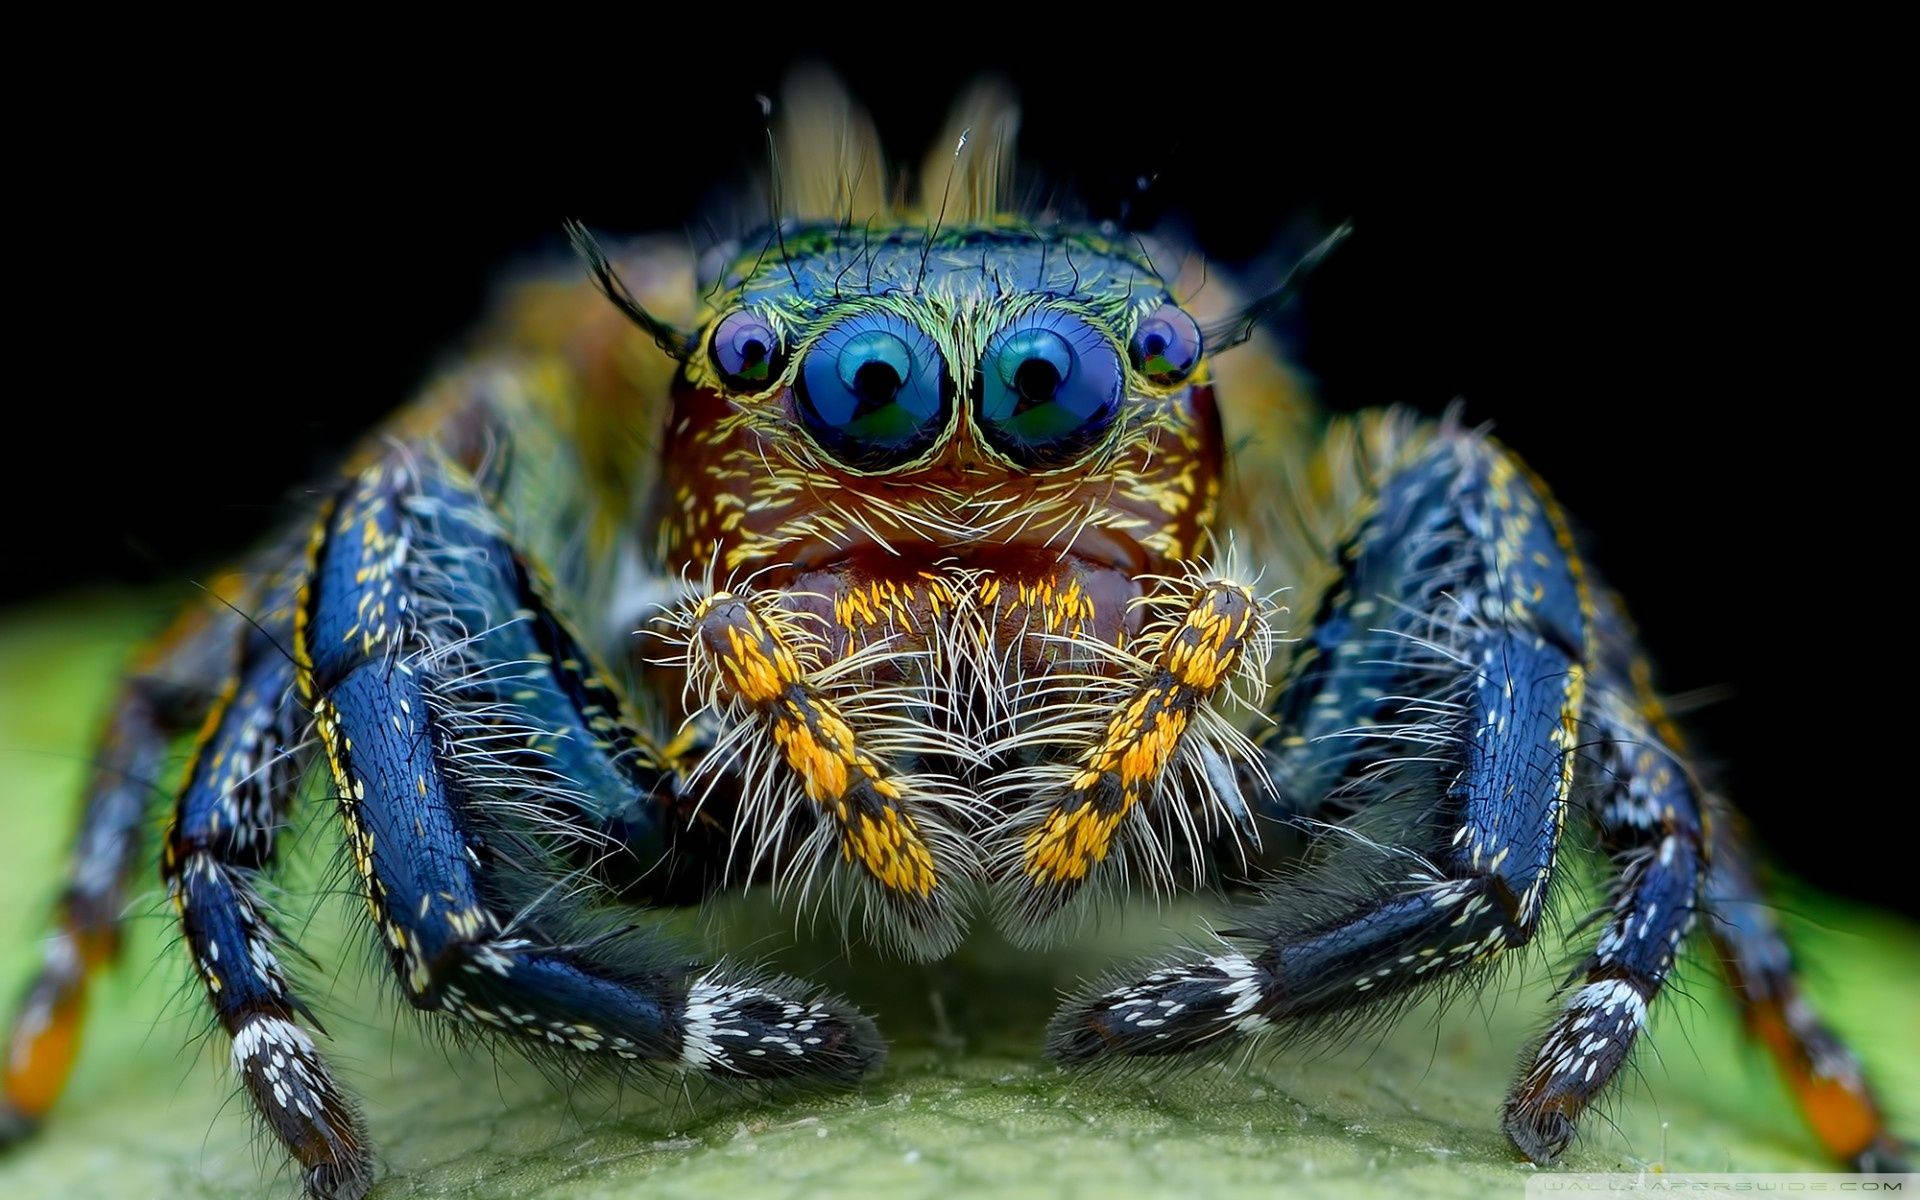 Insect Spider With Eyelashes